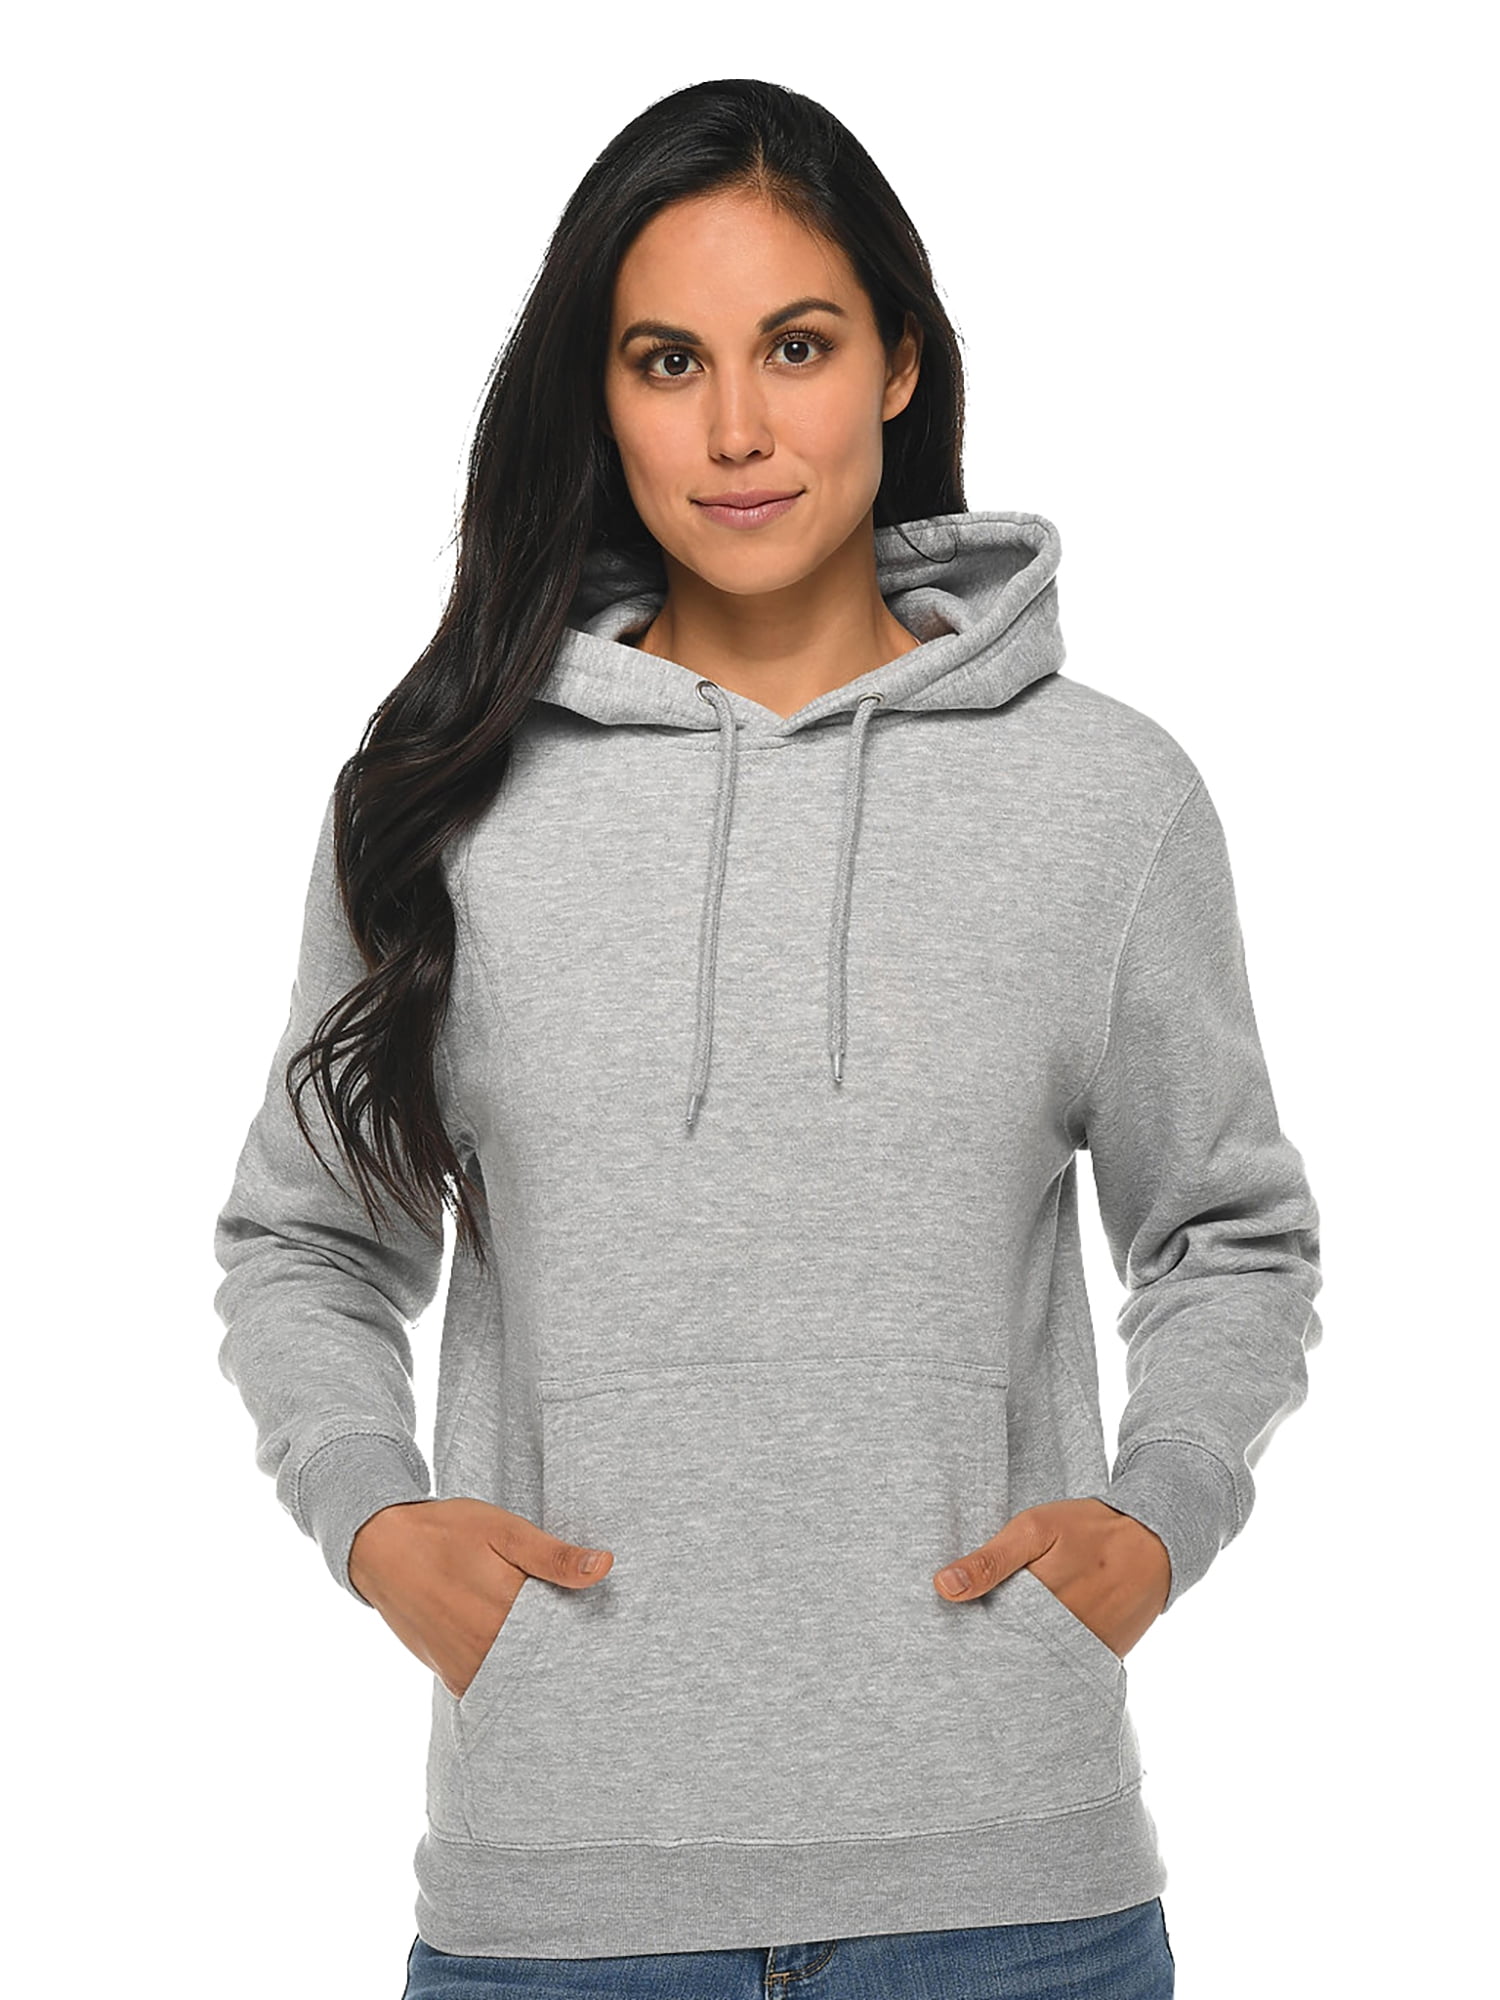 Unisex Pullover Hoodie for Women XS S M L XL 2XL 3XL Men Hoodie Casual ...